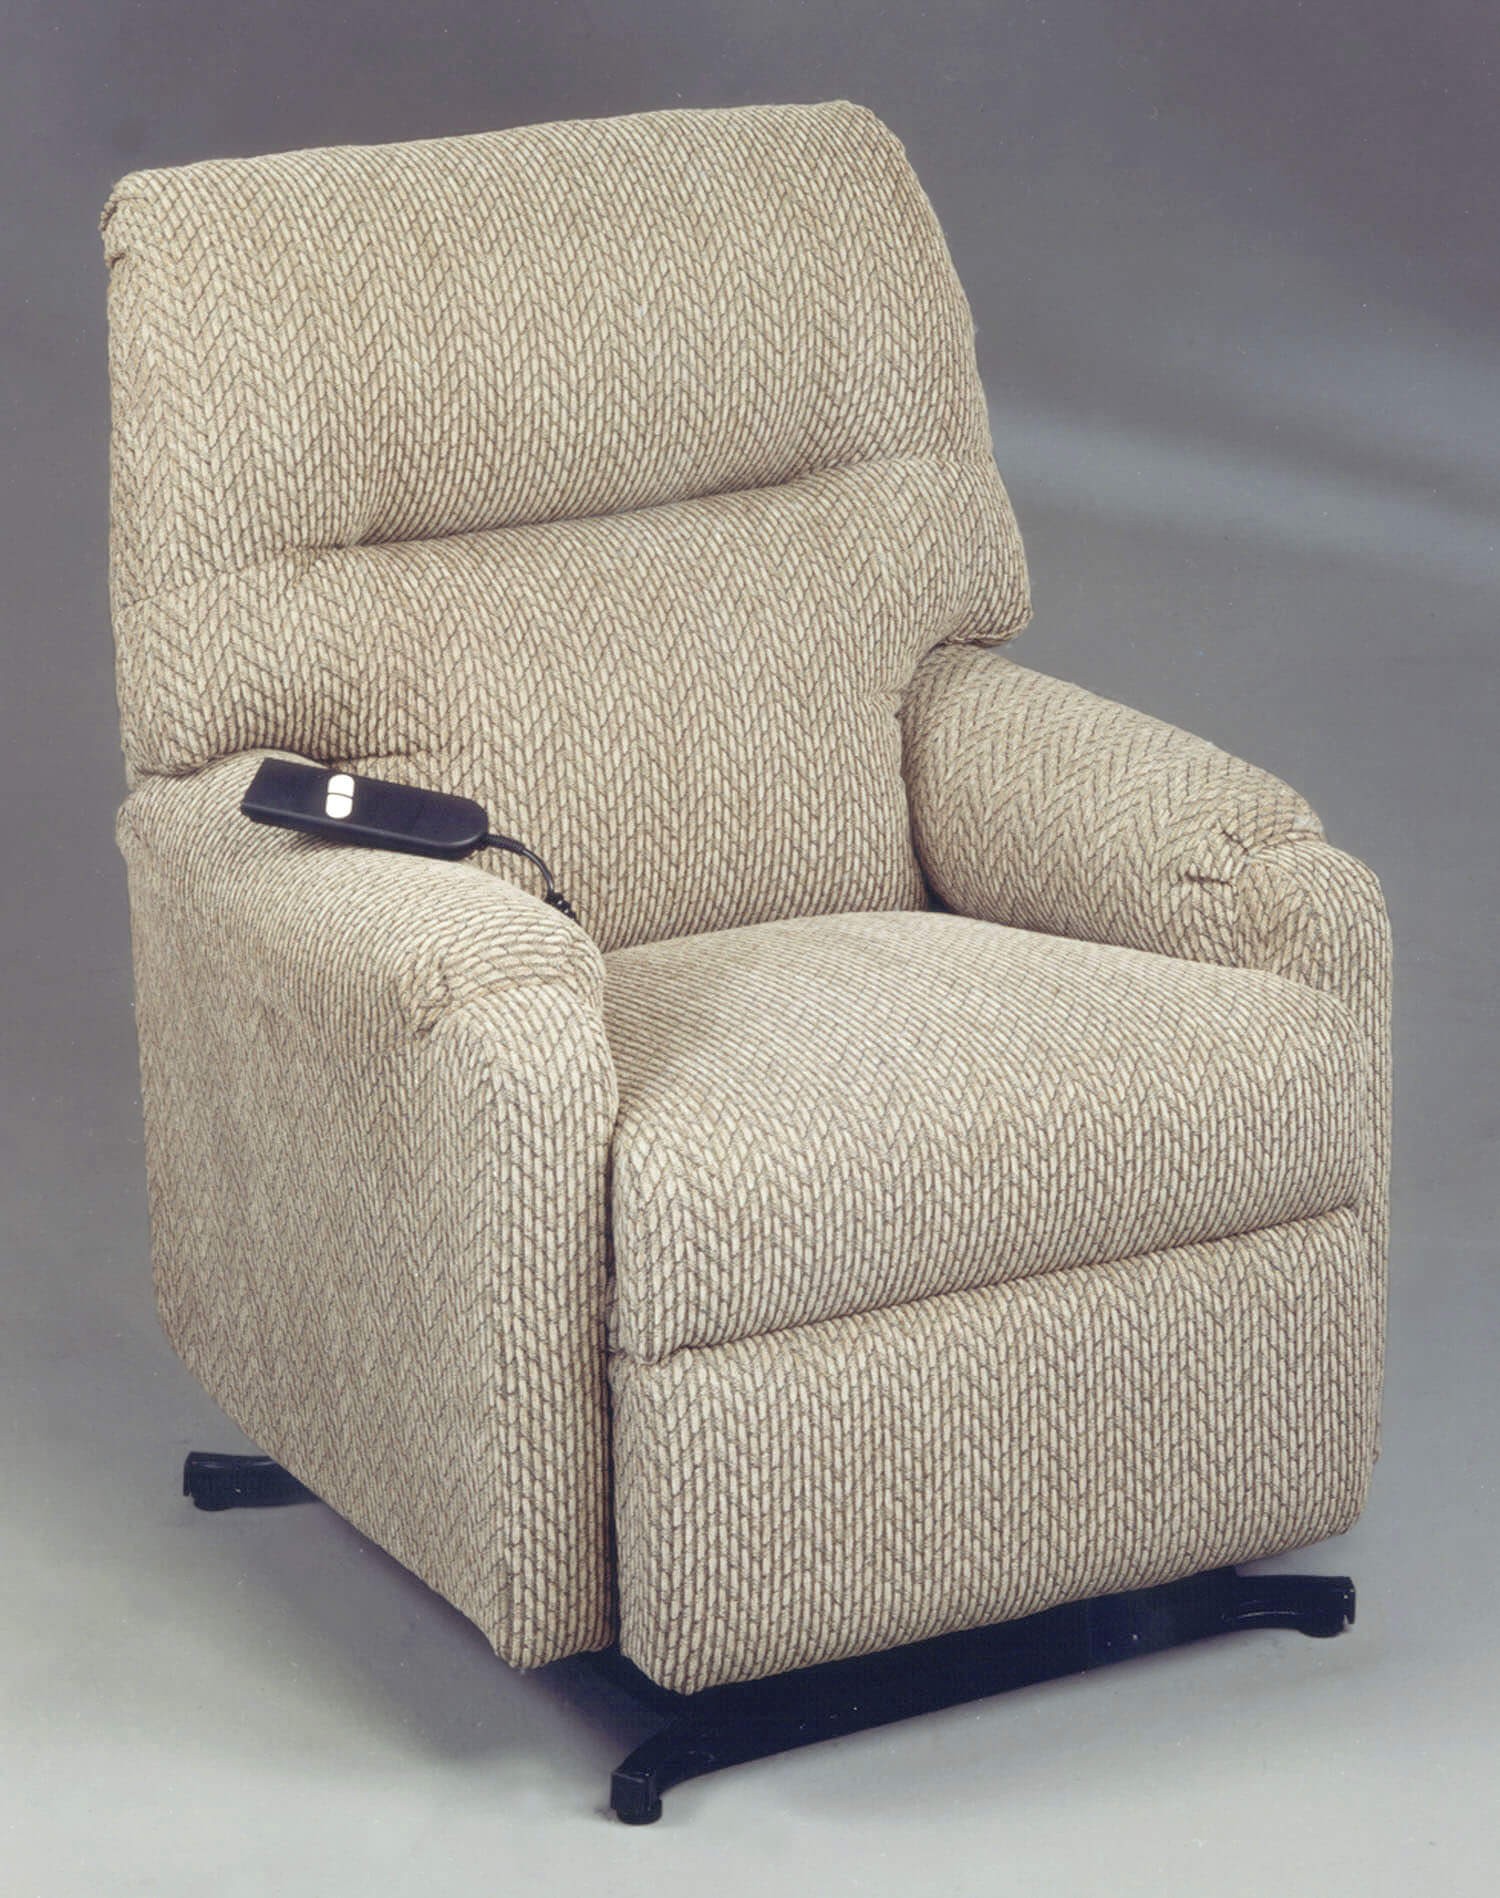 Small electric recliner